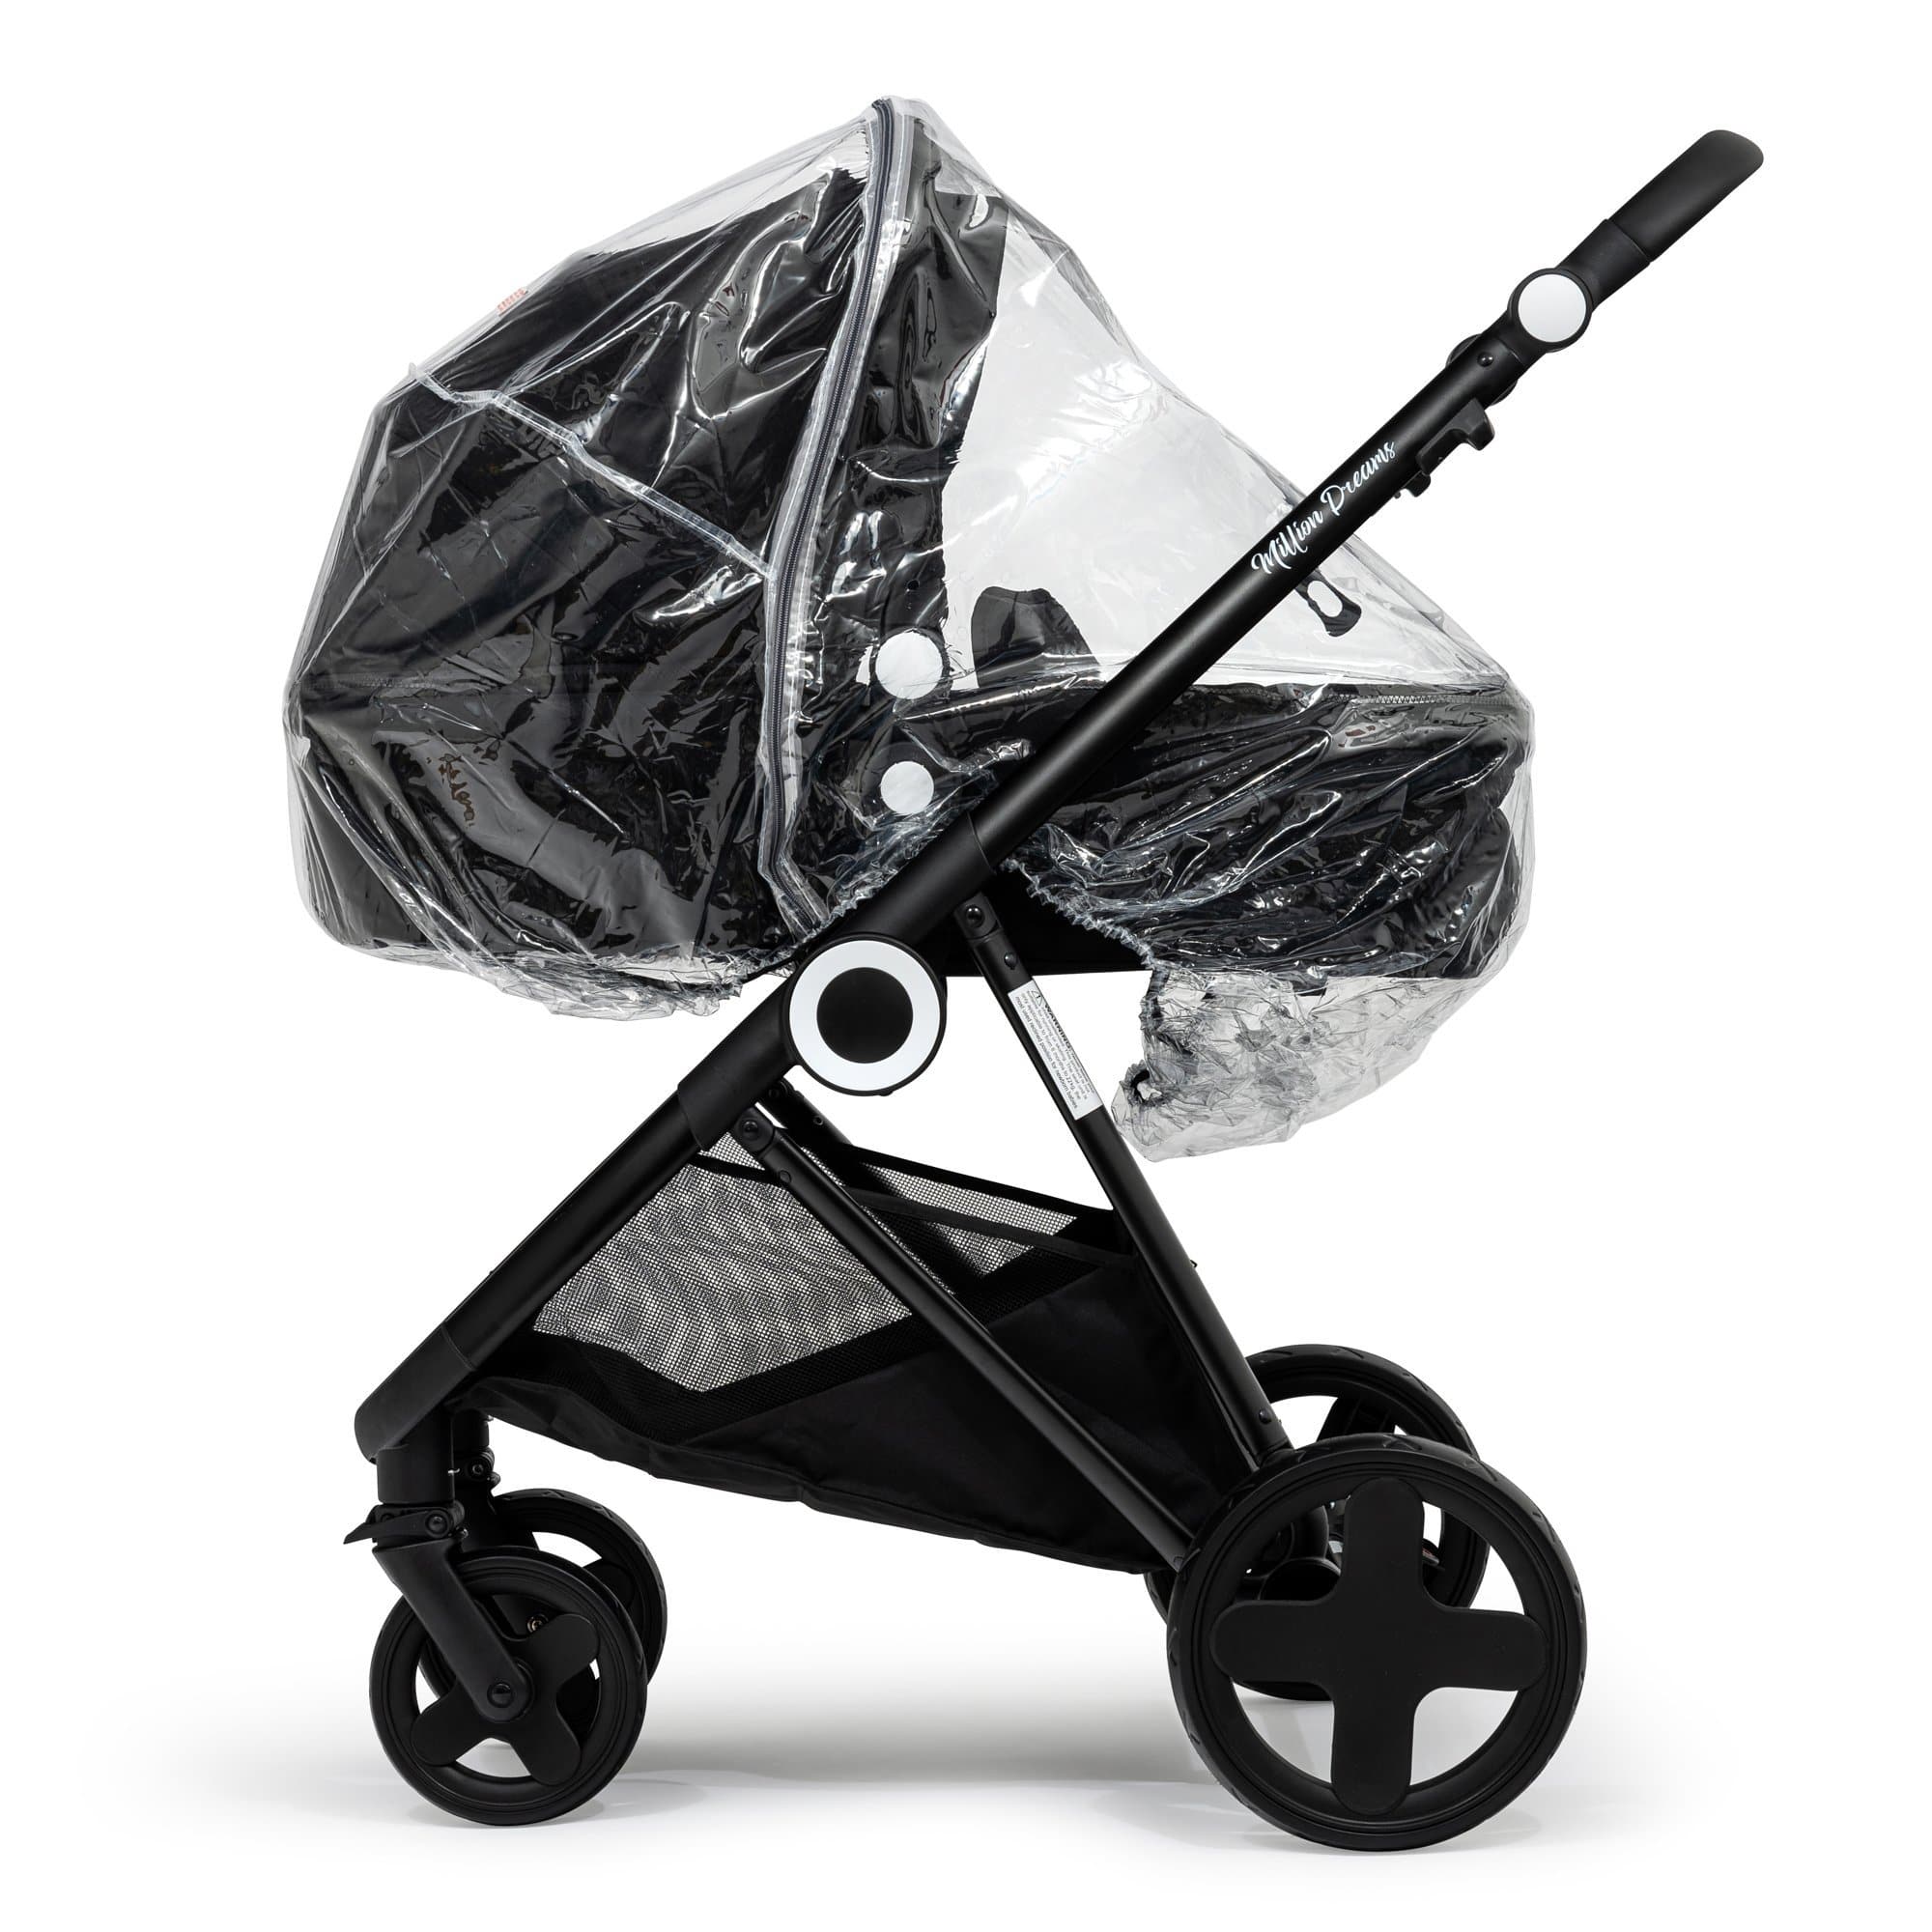 2 in 1 Rain Cover Compatible with Hybrid - Fits All Models - For Your Little One